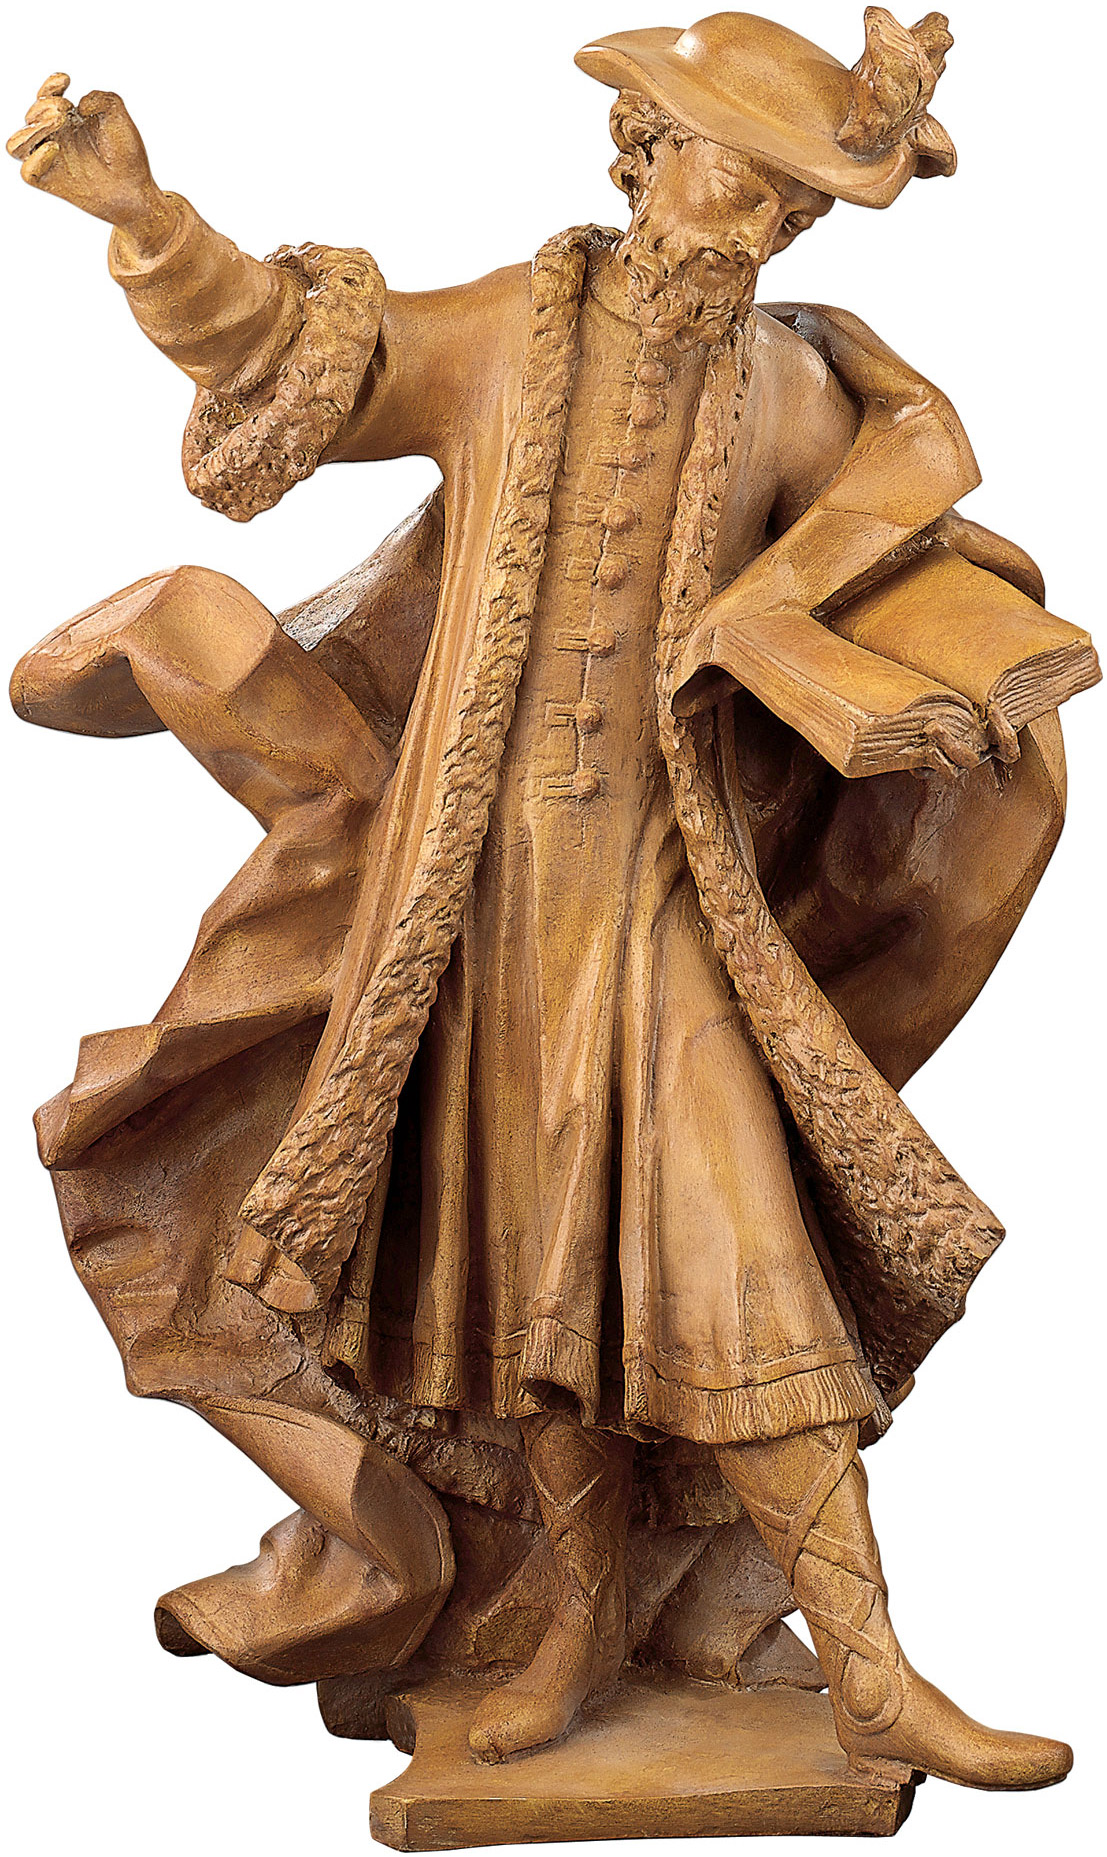 Sculpture "Cosmas", cast with wood finish by Mathias Obermayr